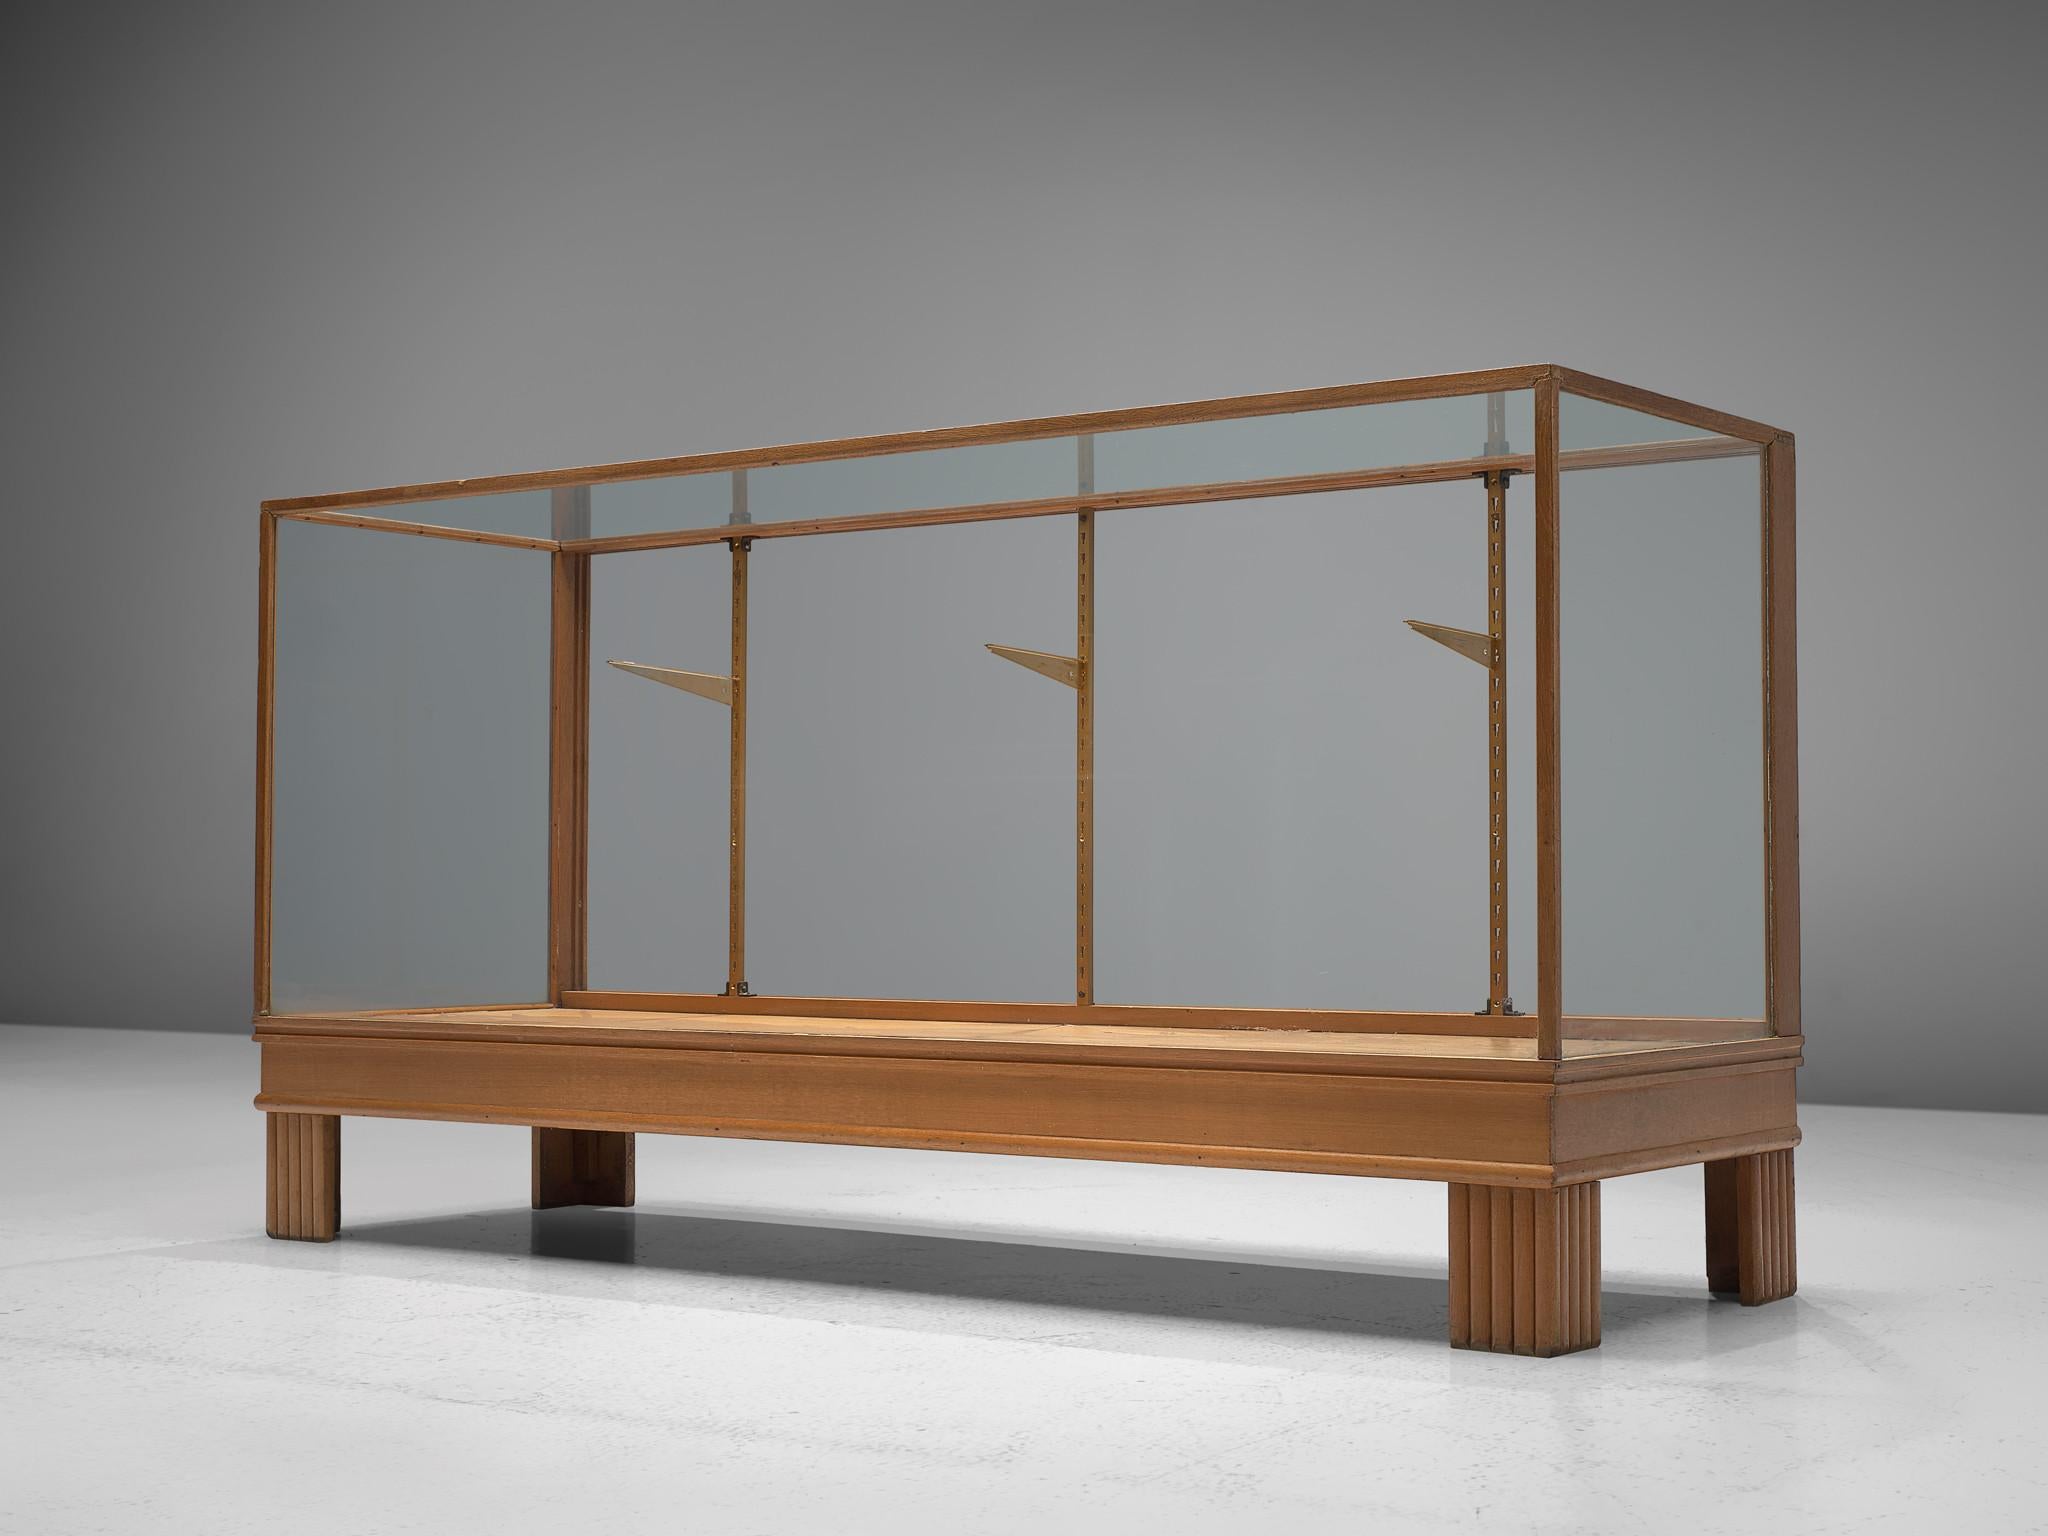 Showcase, oak, glass and brass, France, 1950s.

This large showcase is exactly what you need in the interior of your shop. With five sides covered in glass, the clients will be able to take a good look at your collection. The showcase is finished